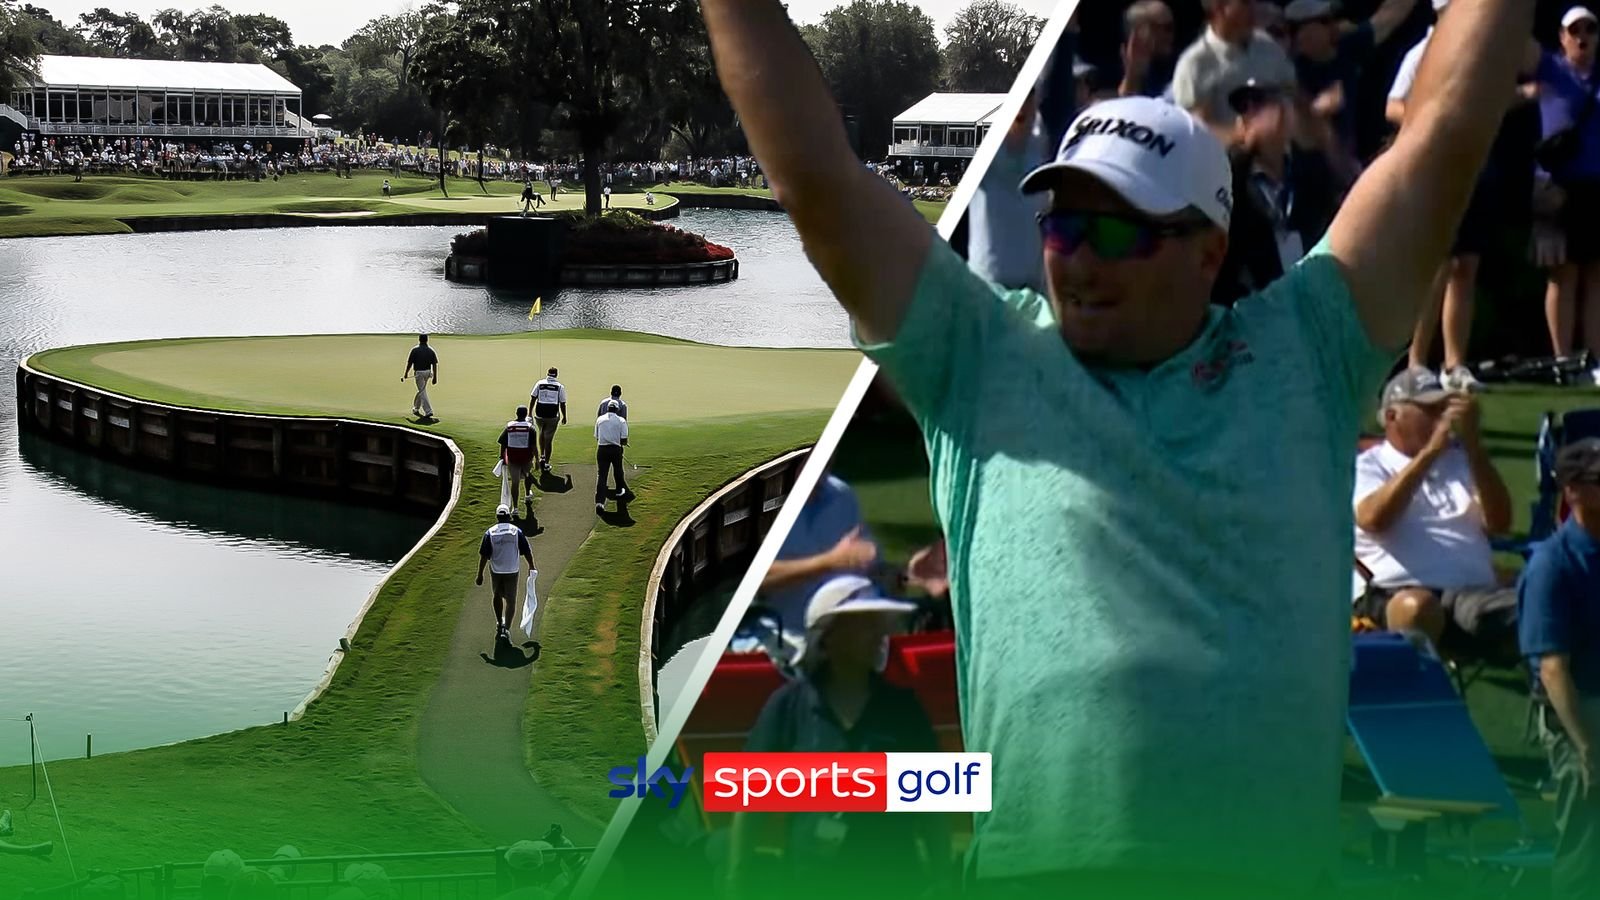 'That didn't take long!' | Fox sinks hole-in-one on iconic 17th at TPC Sawgrass!